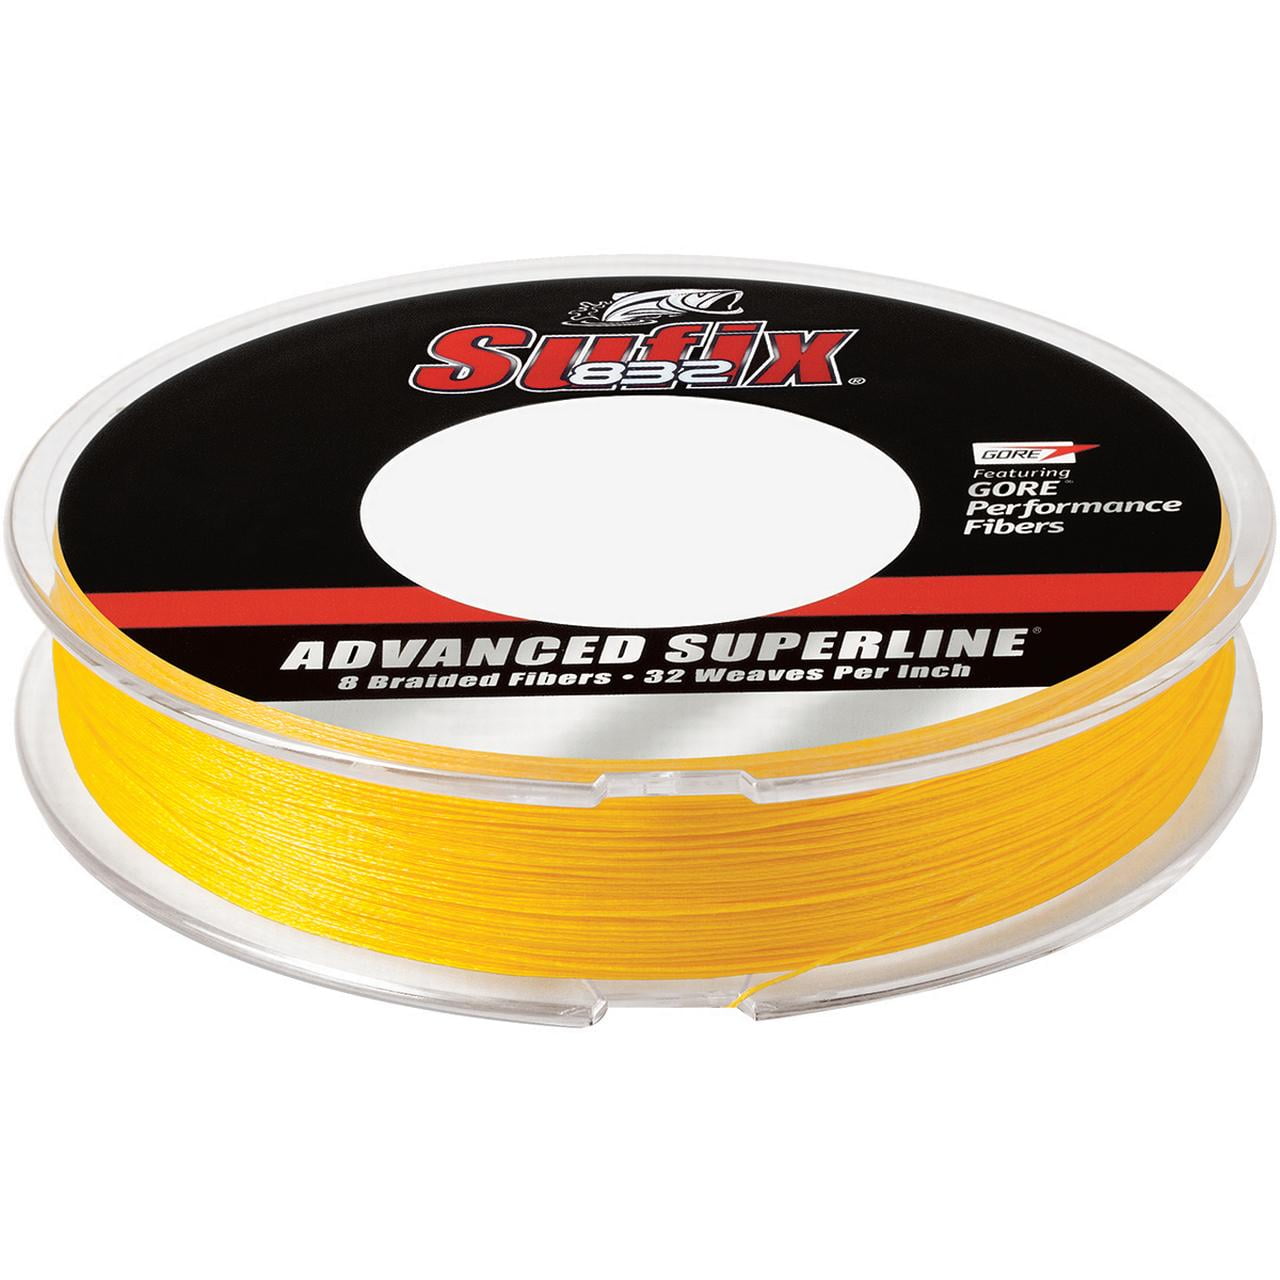  POWER PRO Spectra Fiber Braided Fishing Line, Vermilion Red,  300YD/50LB : Superbraid And Braided Fishing Line : Sports & Outdoors